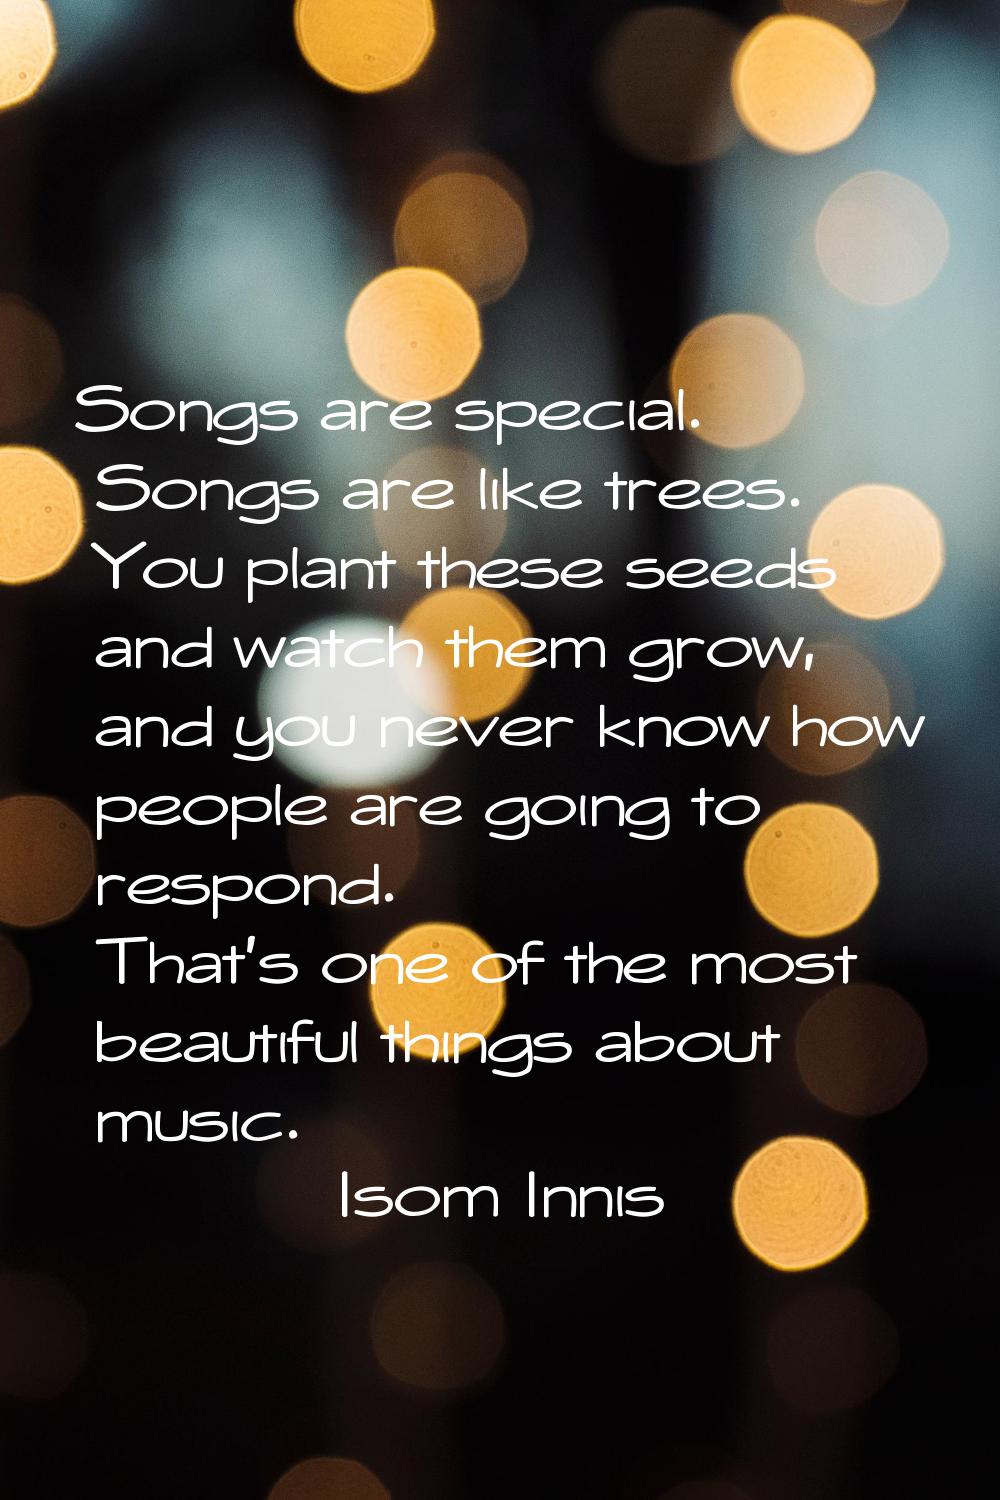 Songs are special. Songs are like trees. You plant these seeds and watch them grow, and you never k